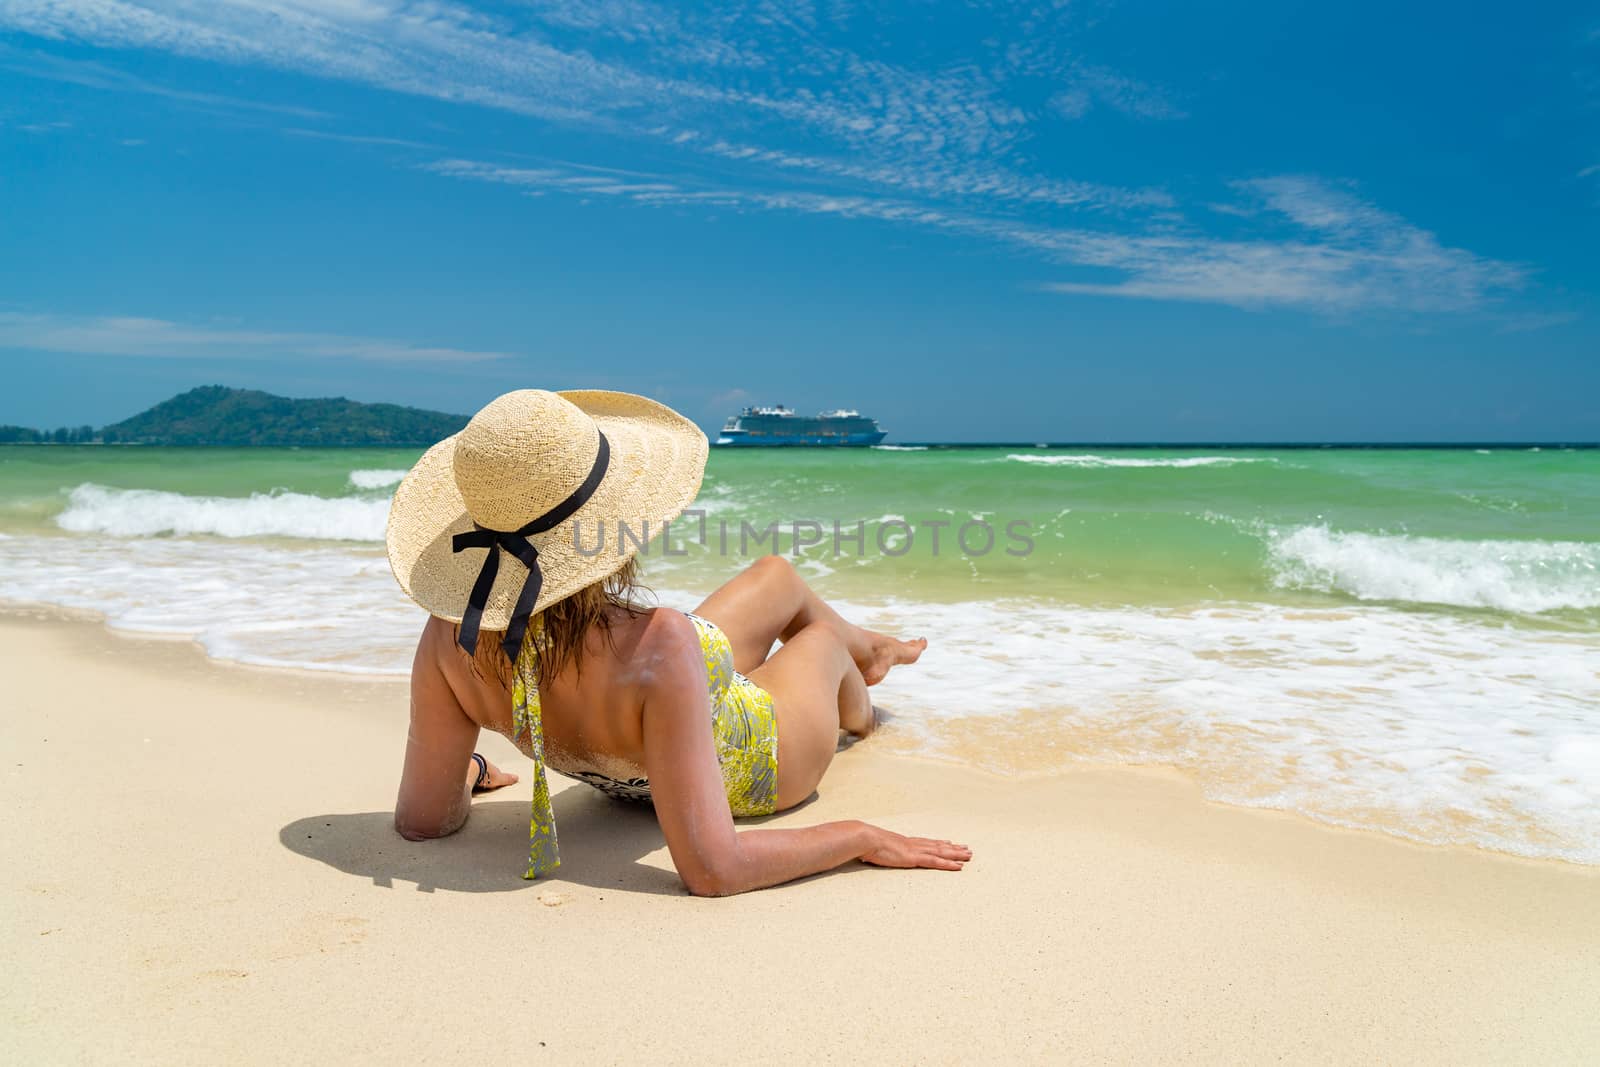 Beautiful Woman at the beach in Thailand